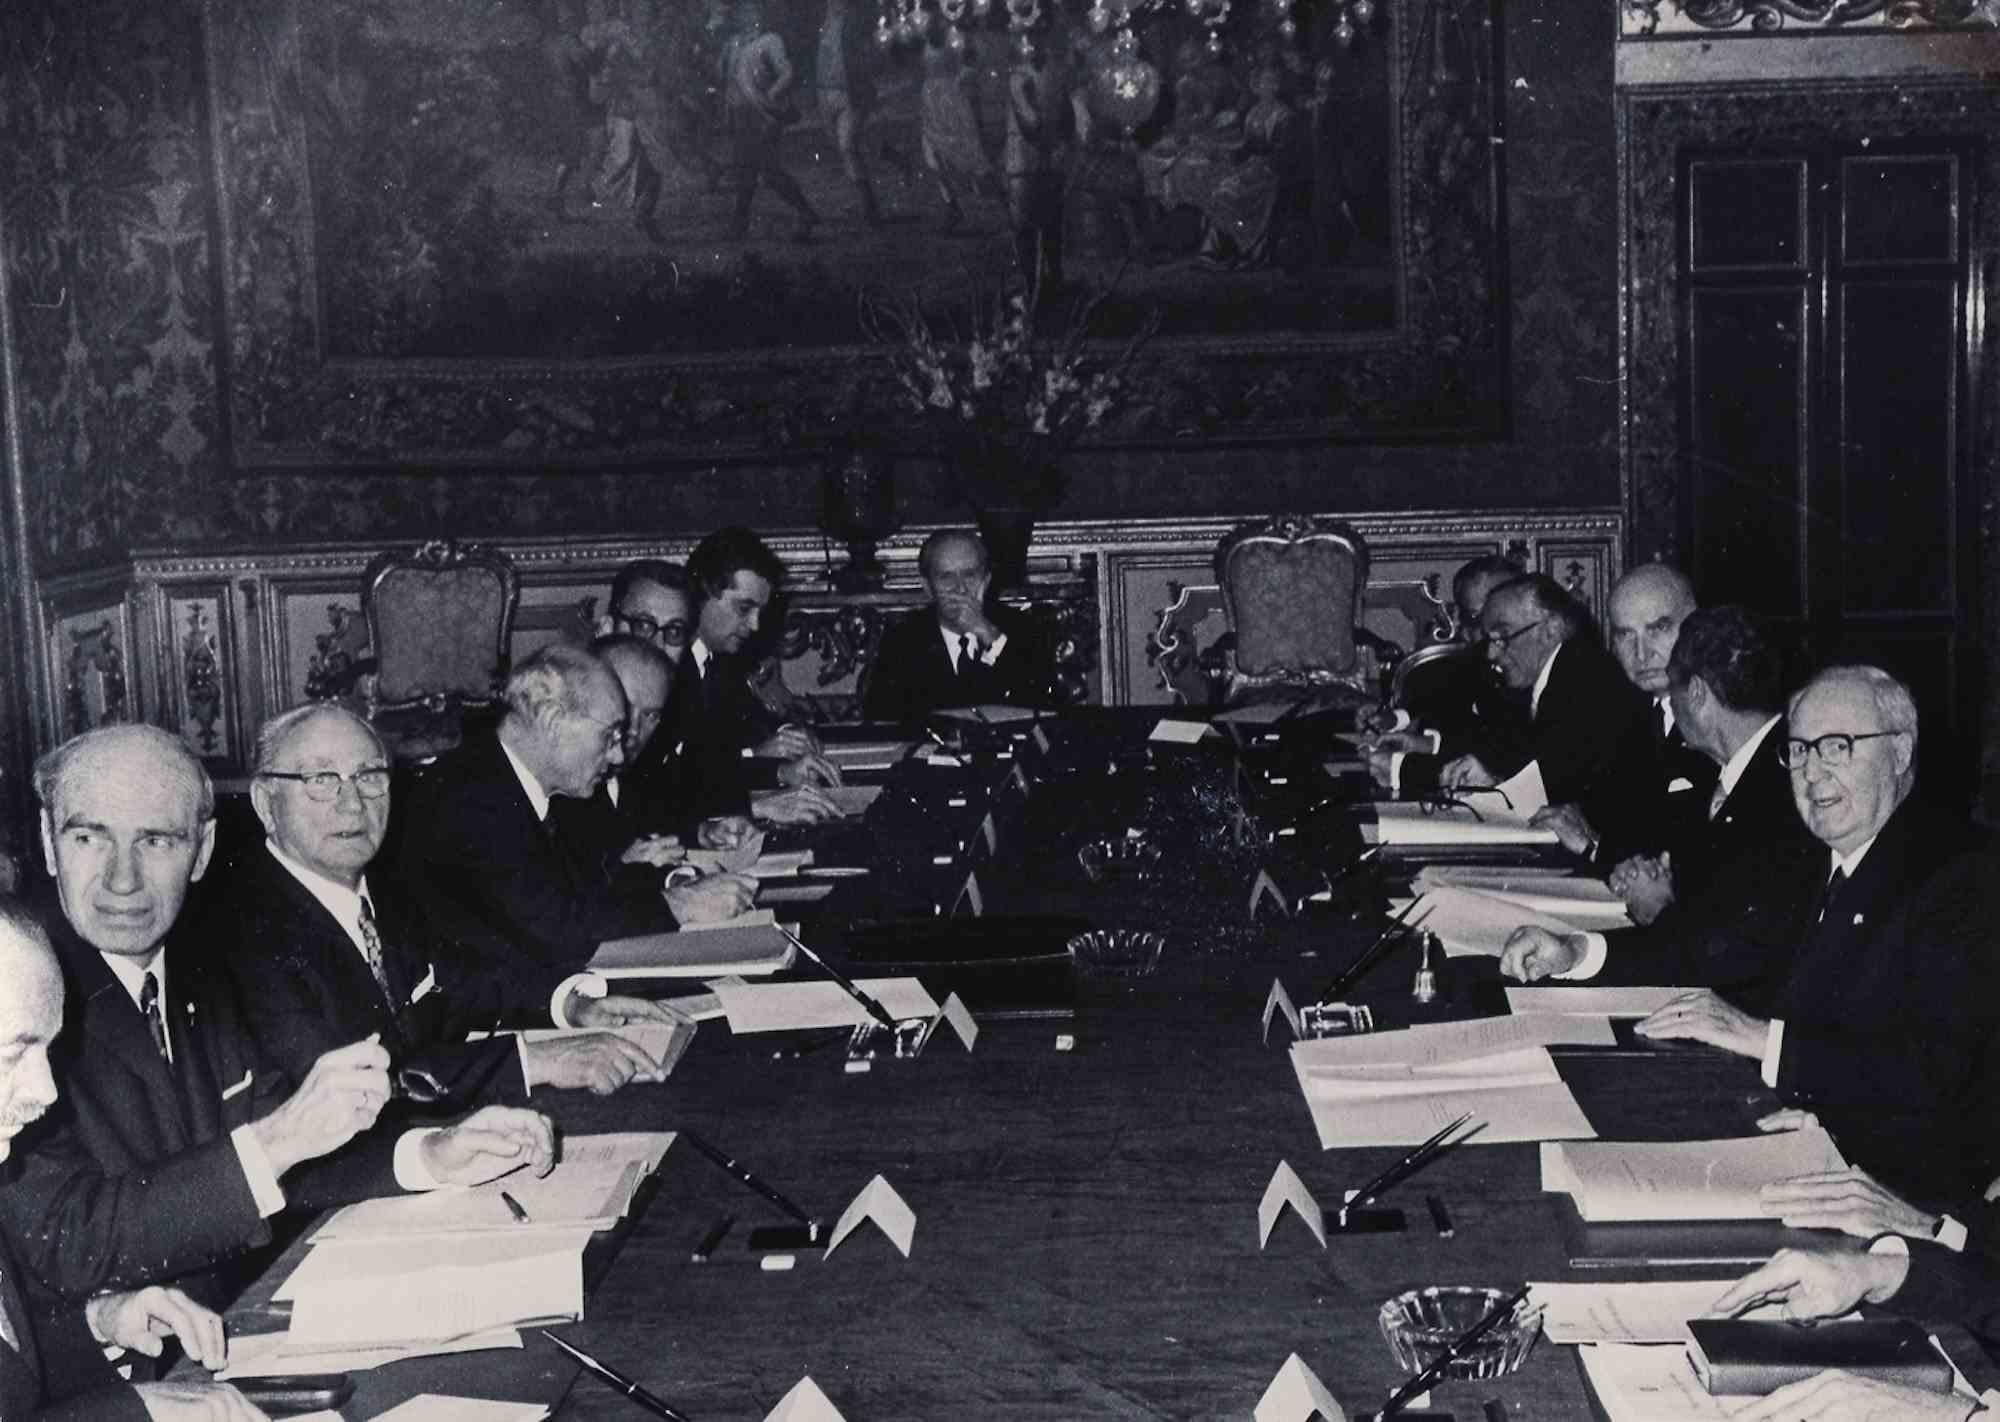 Unknown Figurative Photograph - Historical Photo - Politician Meeting - Vintage photo - mid-20th Century